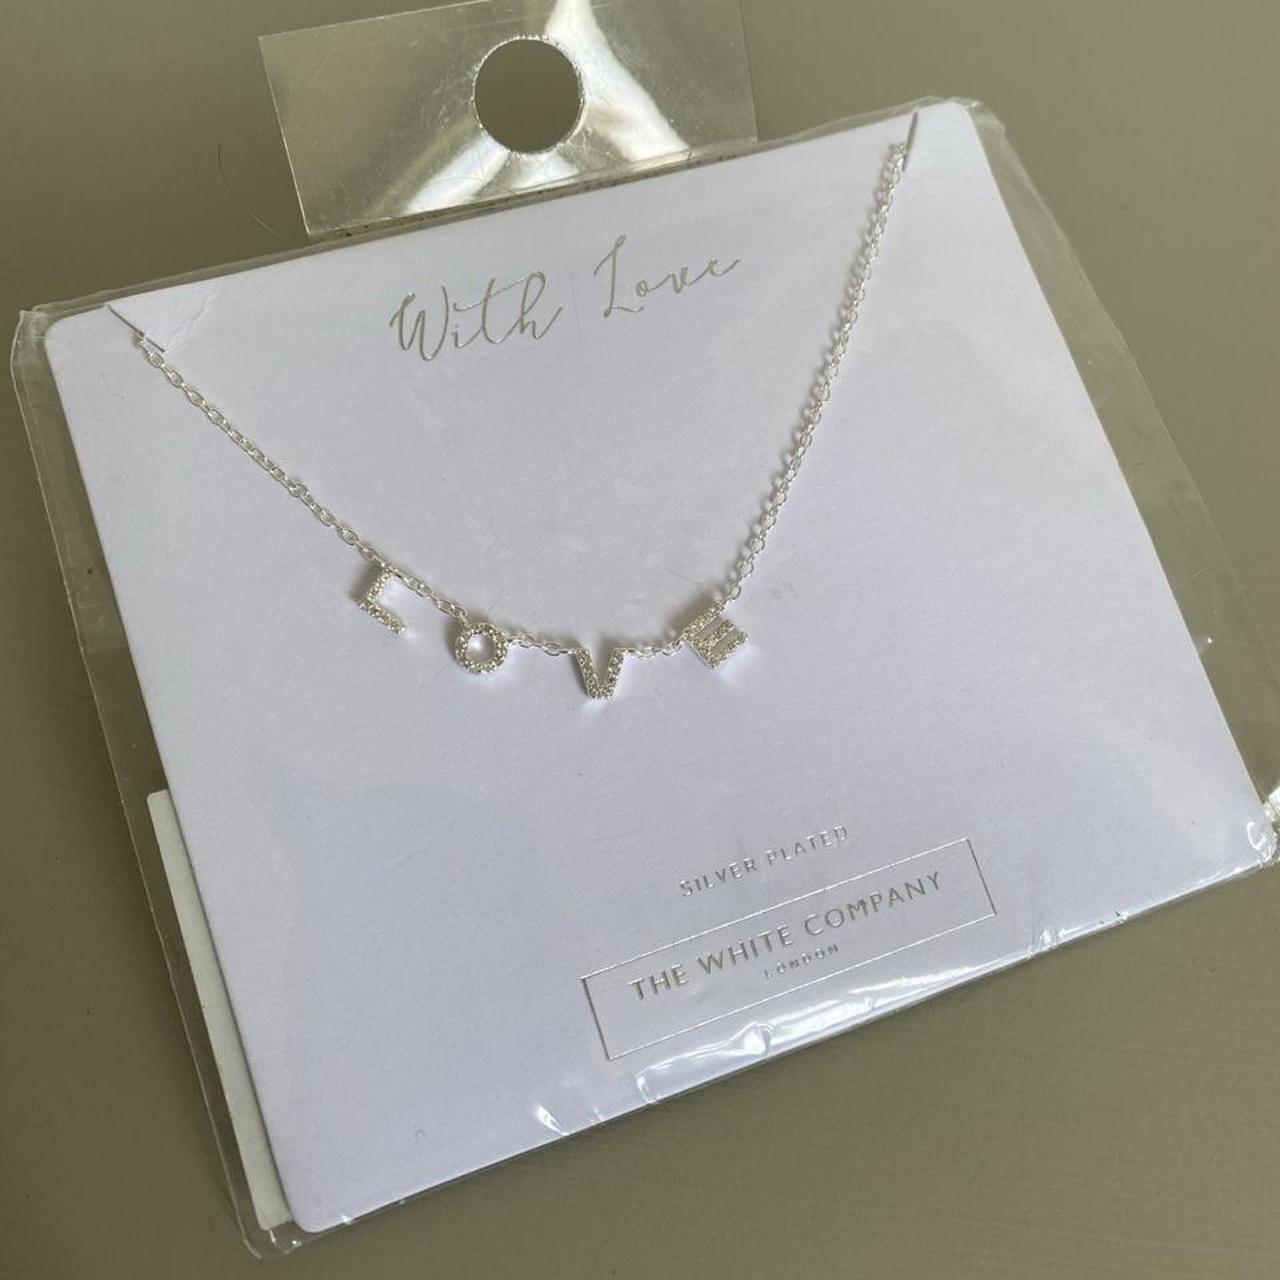 Jewelry | Necklaces & Earrings| The White Company US